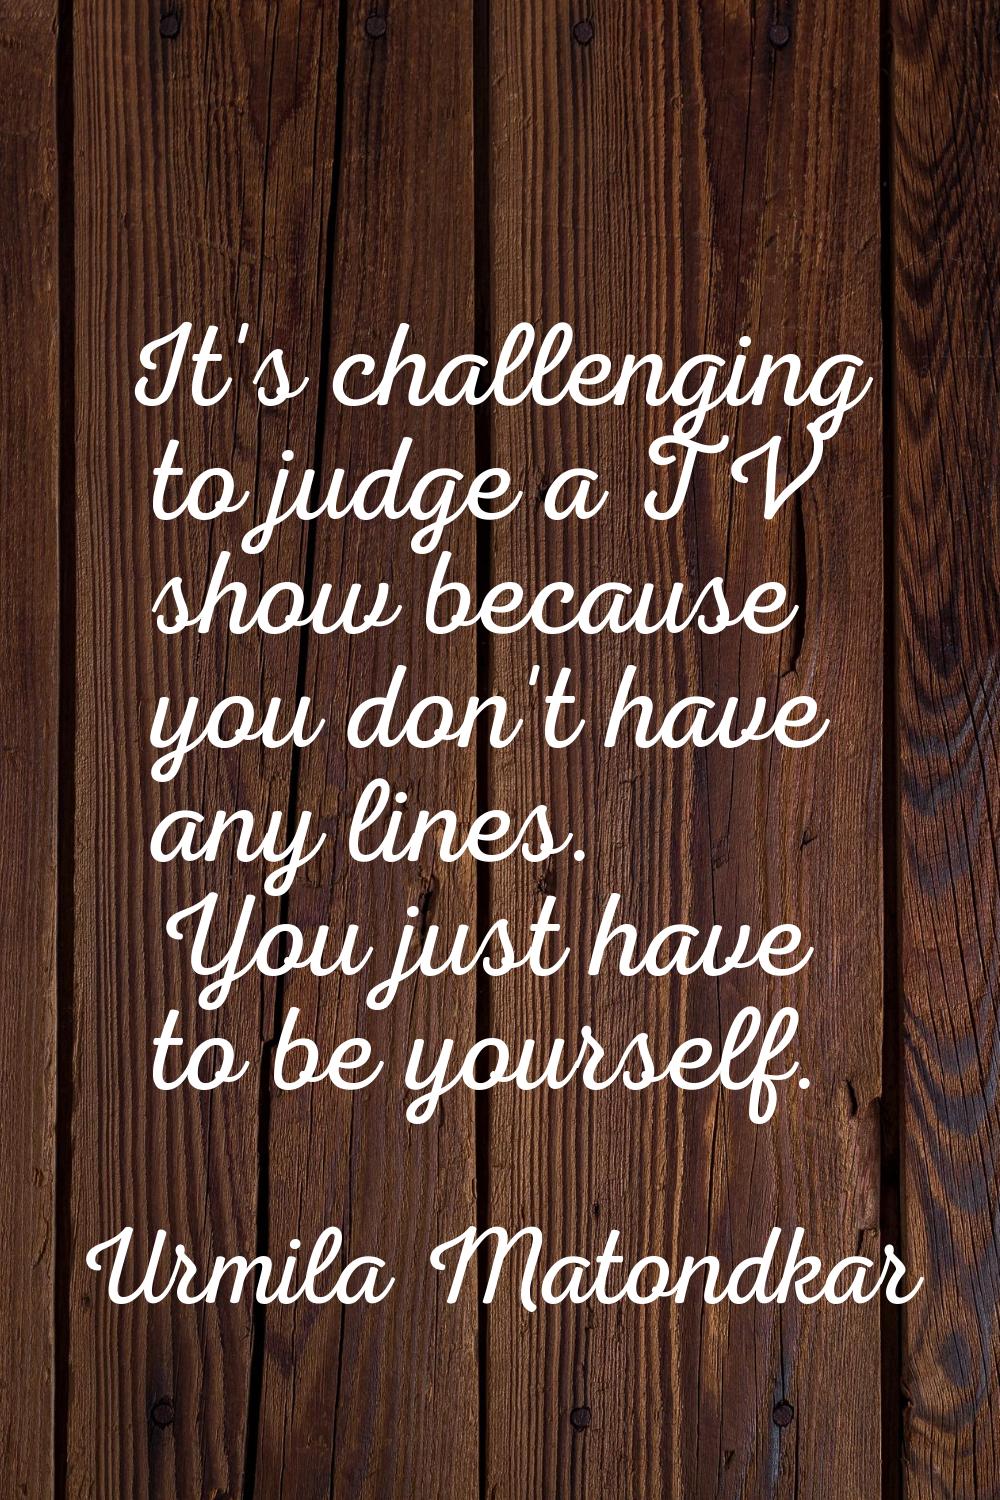 It's challenging to judge a TV show because you don't have any lines. You just have to be yourself.